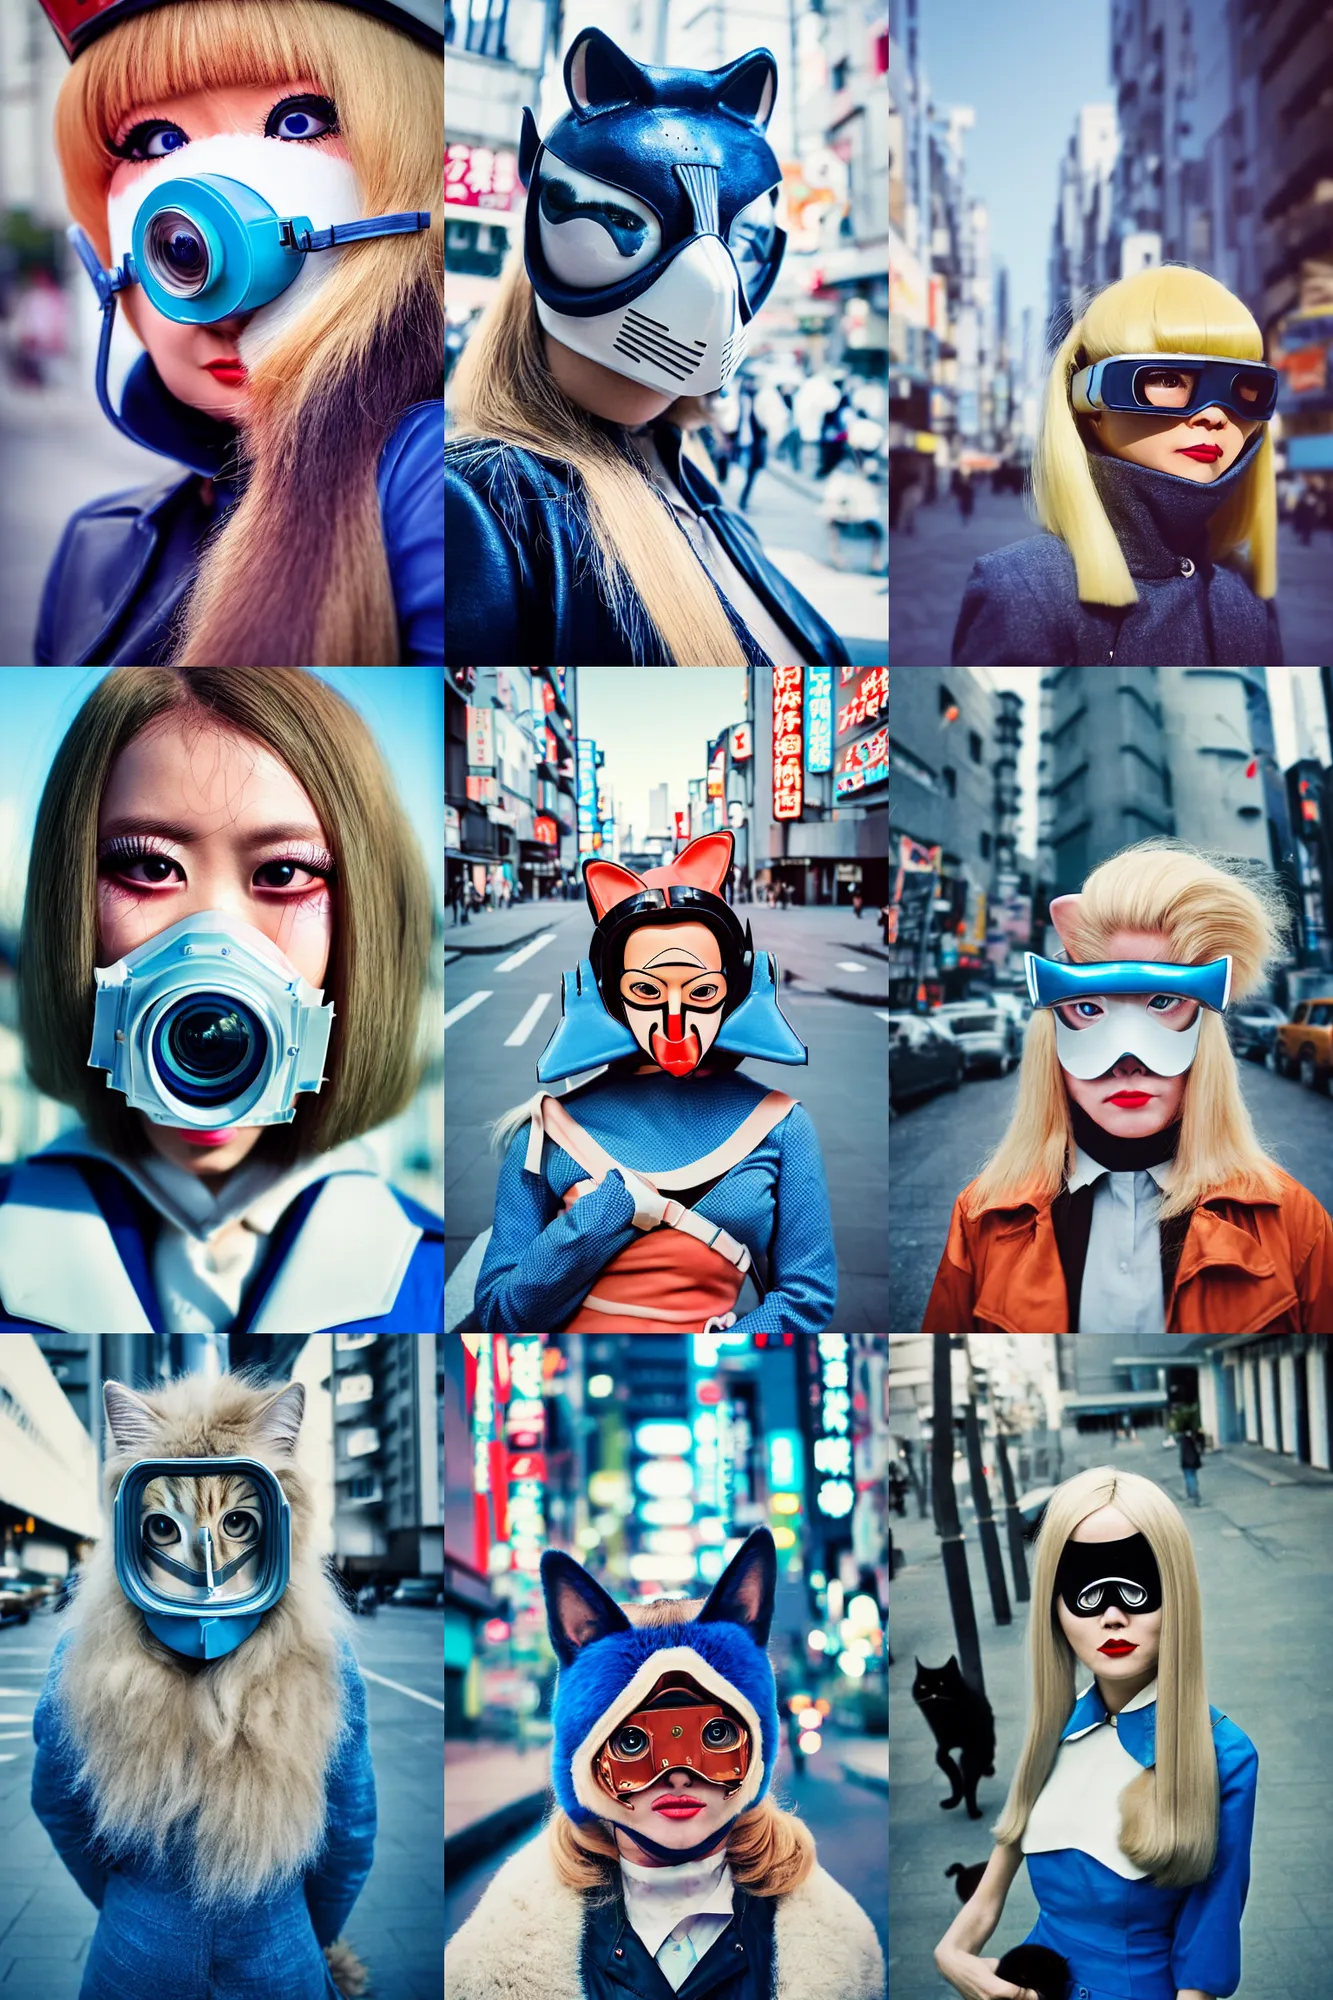 Prompt: Cinestill 50d,8K,highly detailed: beautiful three point perspective extreme closeup portrait photo in style of 1960s frontiers in cosplay retrofuturism tokyo seinen manga street photography fashion edition, tilt shift zaha hadid style tokyo background, highly detailed, focus on cat mask respirator;blonde hair;blue eyes, clear eyes, soft lighting